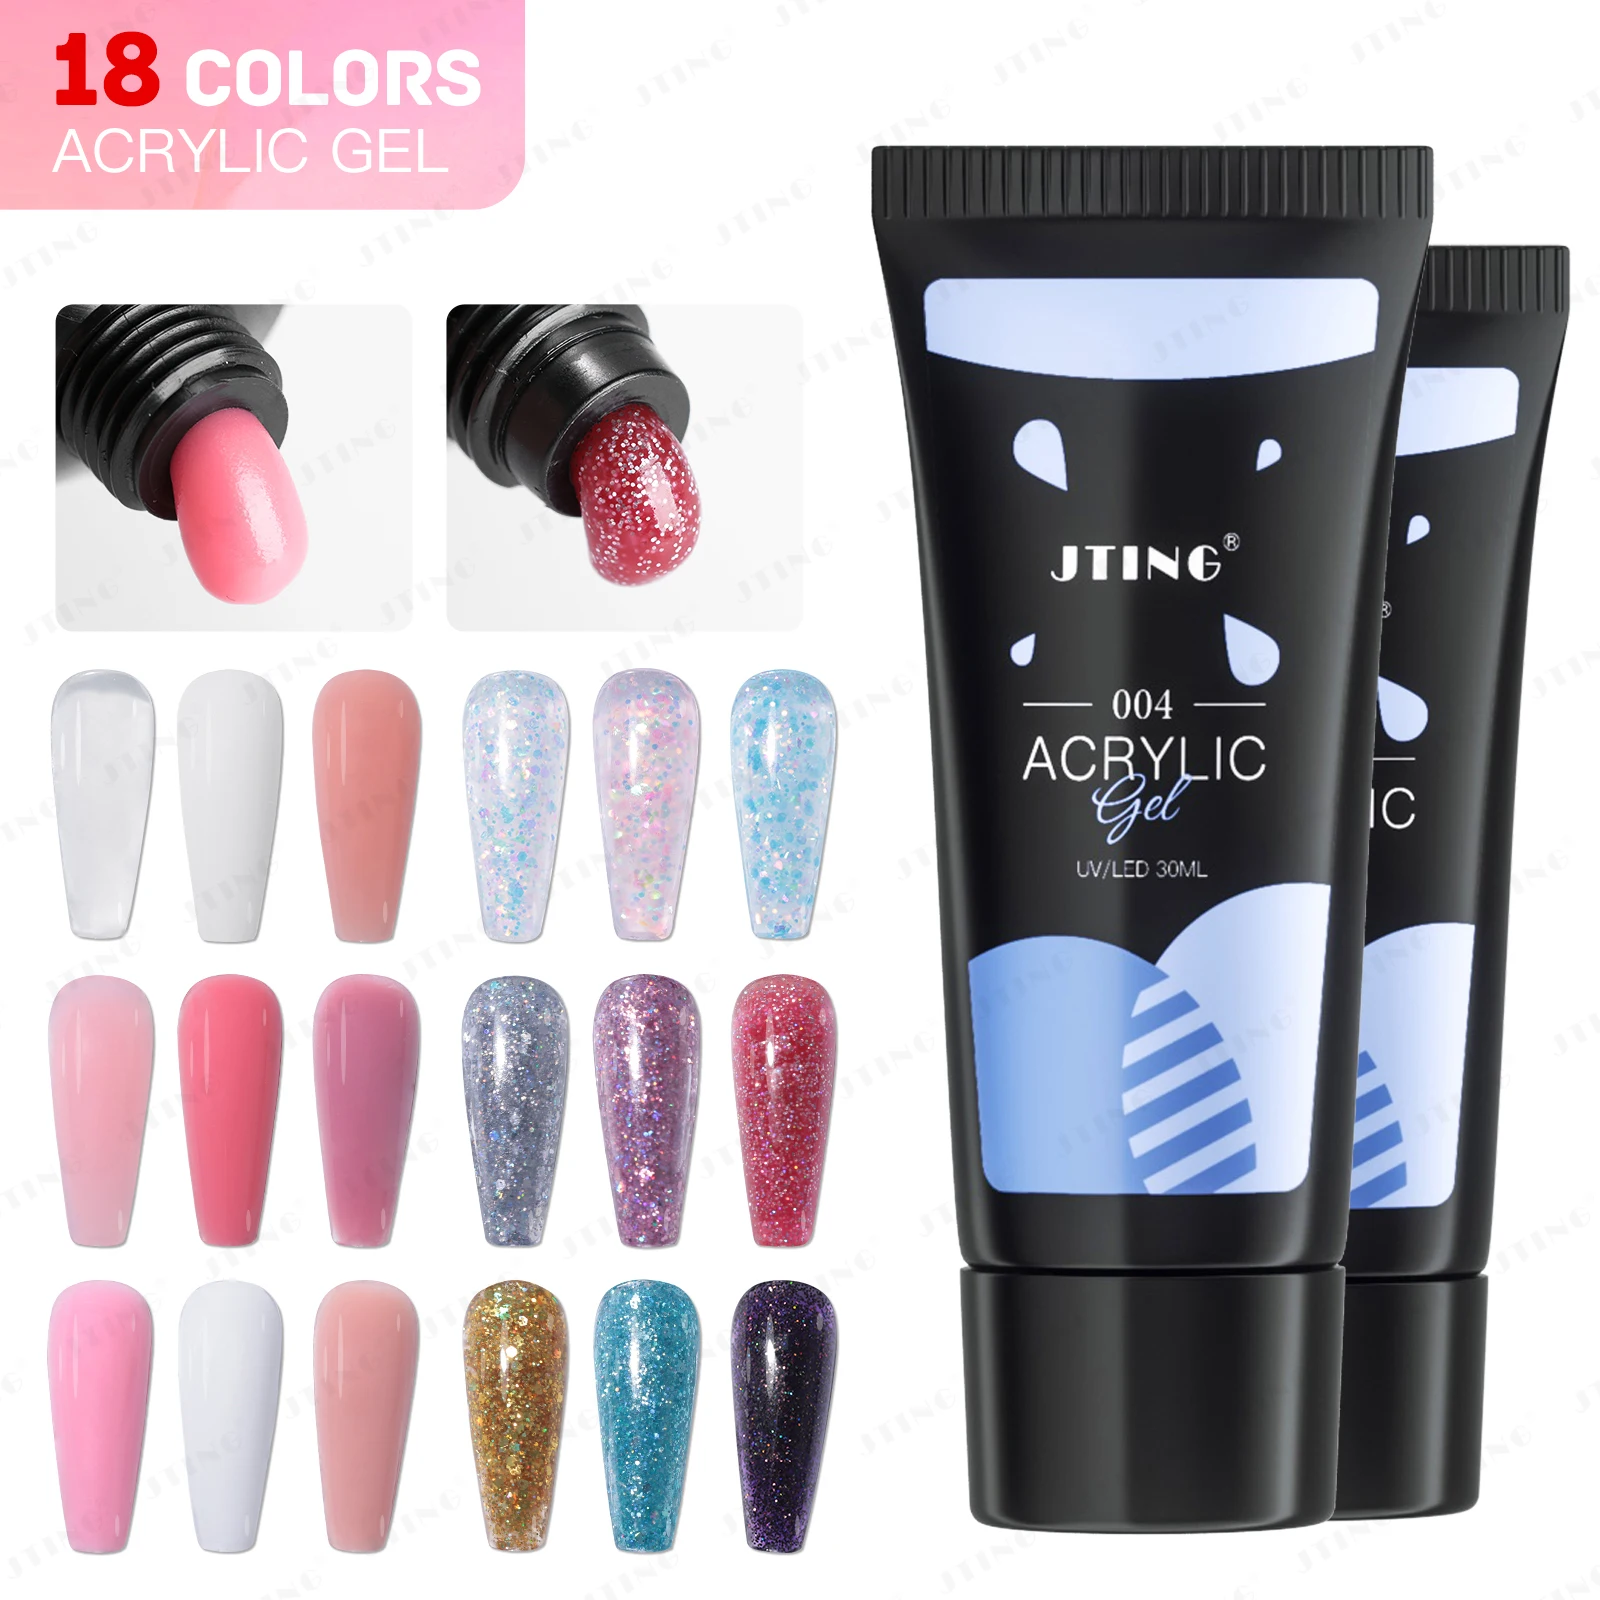 

JTING Professional quick extension easy soak off acrylic nail acryl gel 18color set 30ml tube OEM Private label Glitter poly gel